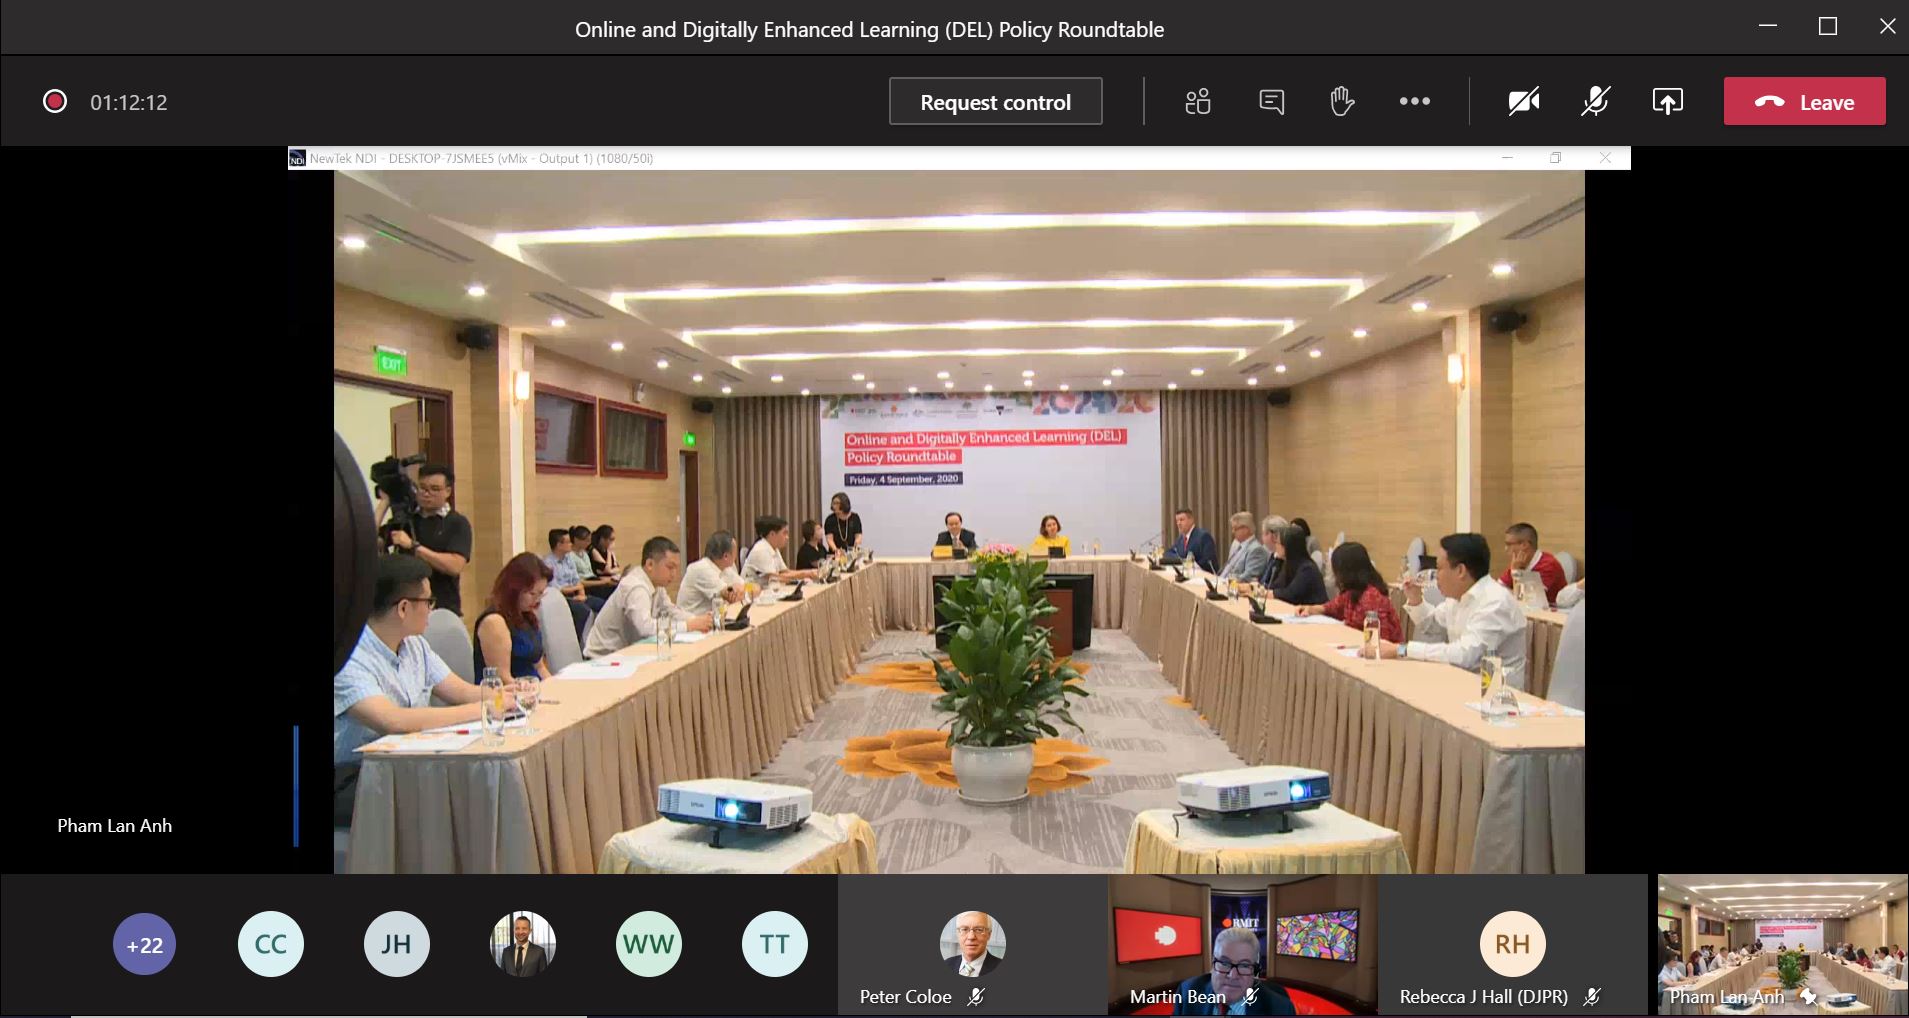 The Online and Digitally Enhanced Learning (DEL) Policy Roundtable was a platform to share experiences about the rapid shift to online learning and the innovations developed as a result.